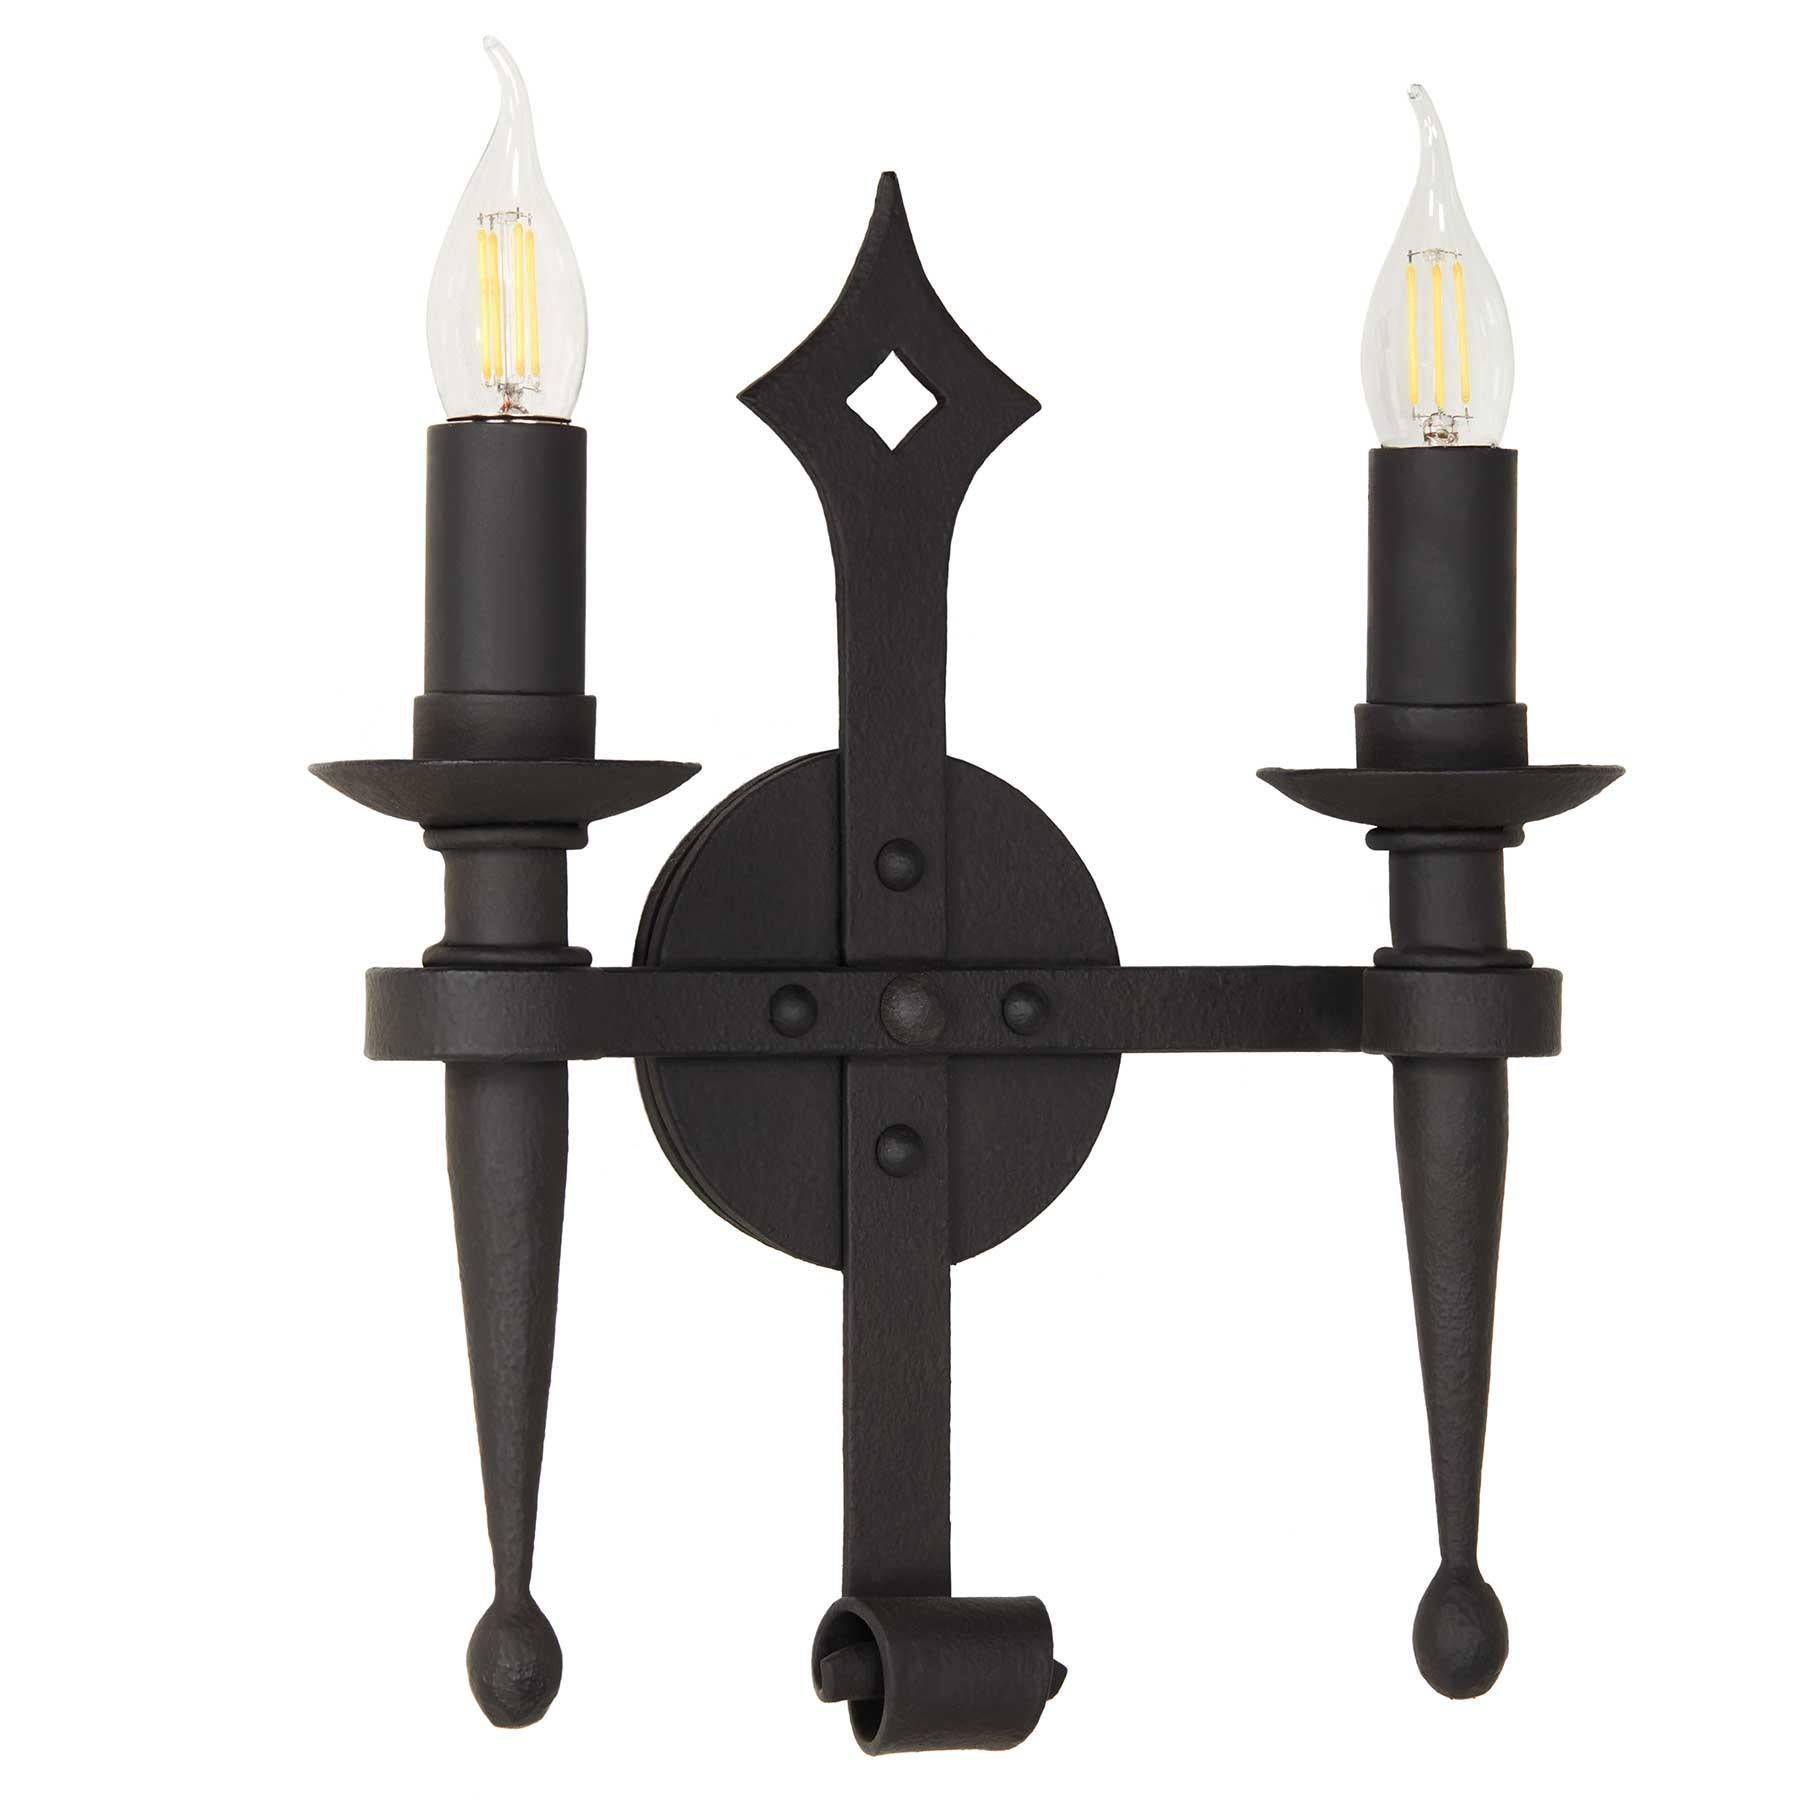 This wrought iron wall mount fixture has a classic French influence, with simple scrolls and a diamond motif on the backplate.  A perfect sconce for many architectural styles, including Spanish Hacienda, Mediterranean Villa and French Colonial. 